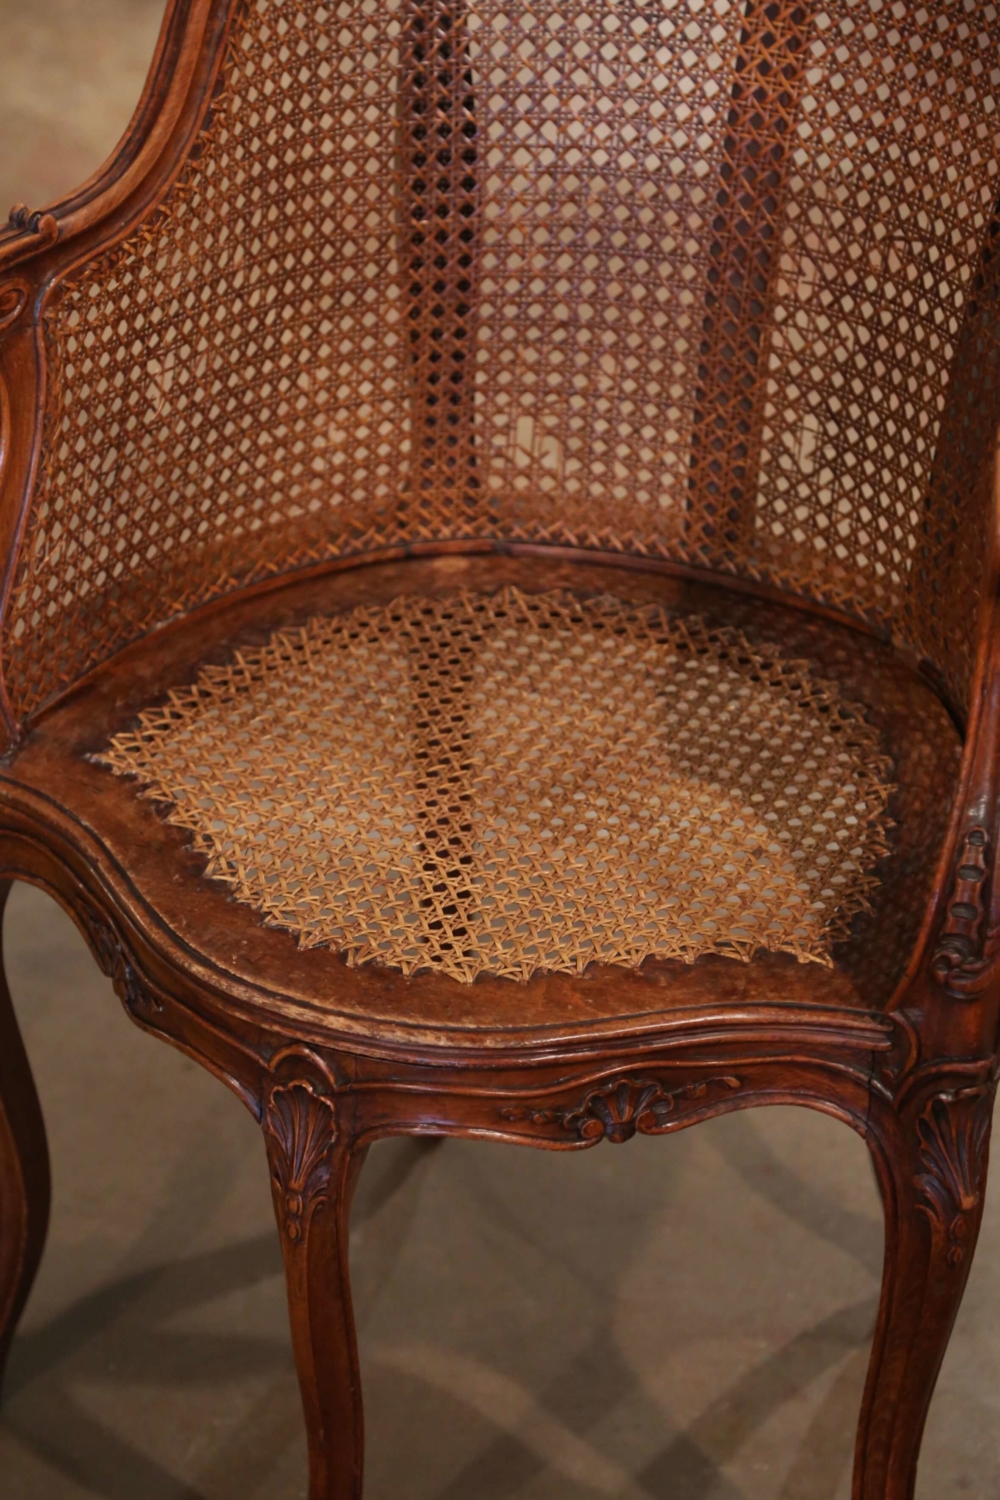 19th Century French Louis XV Cane Five-Leg Desk Armchair - Country French  Interiors